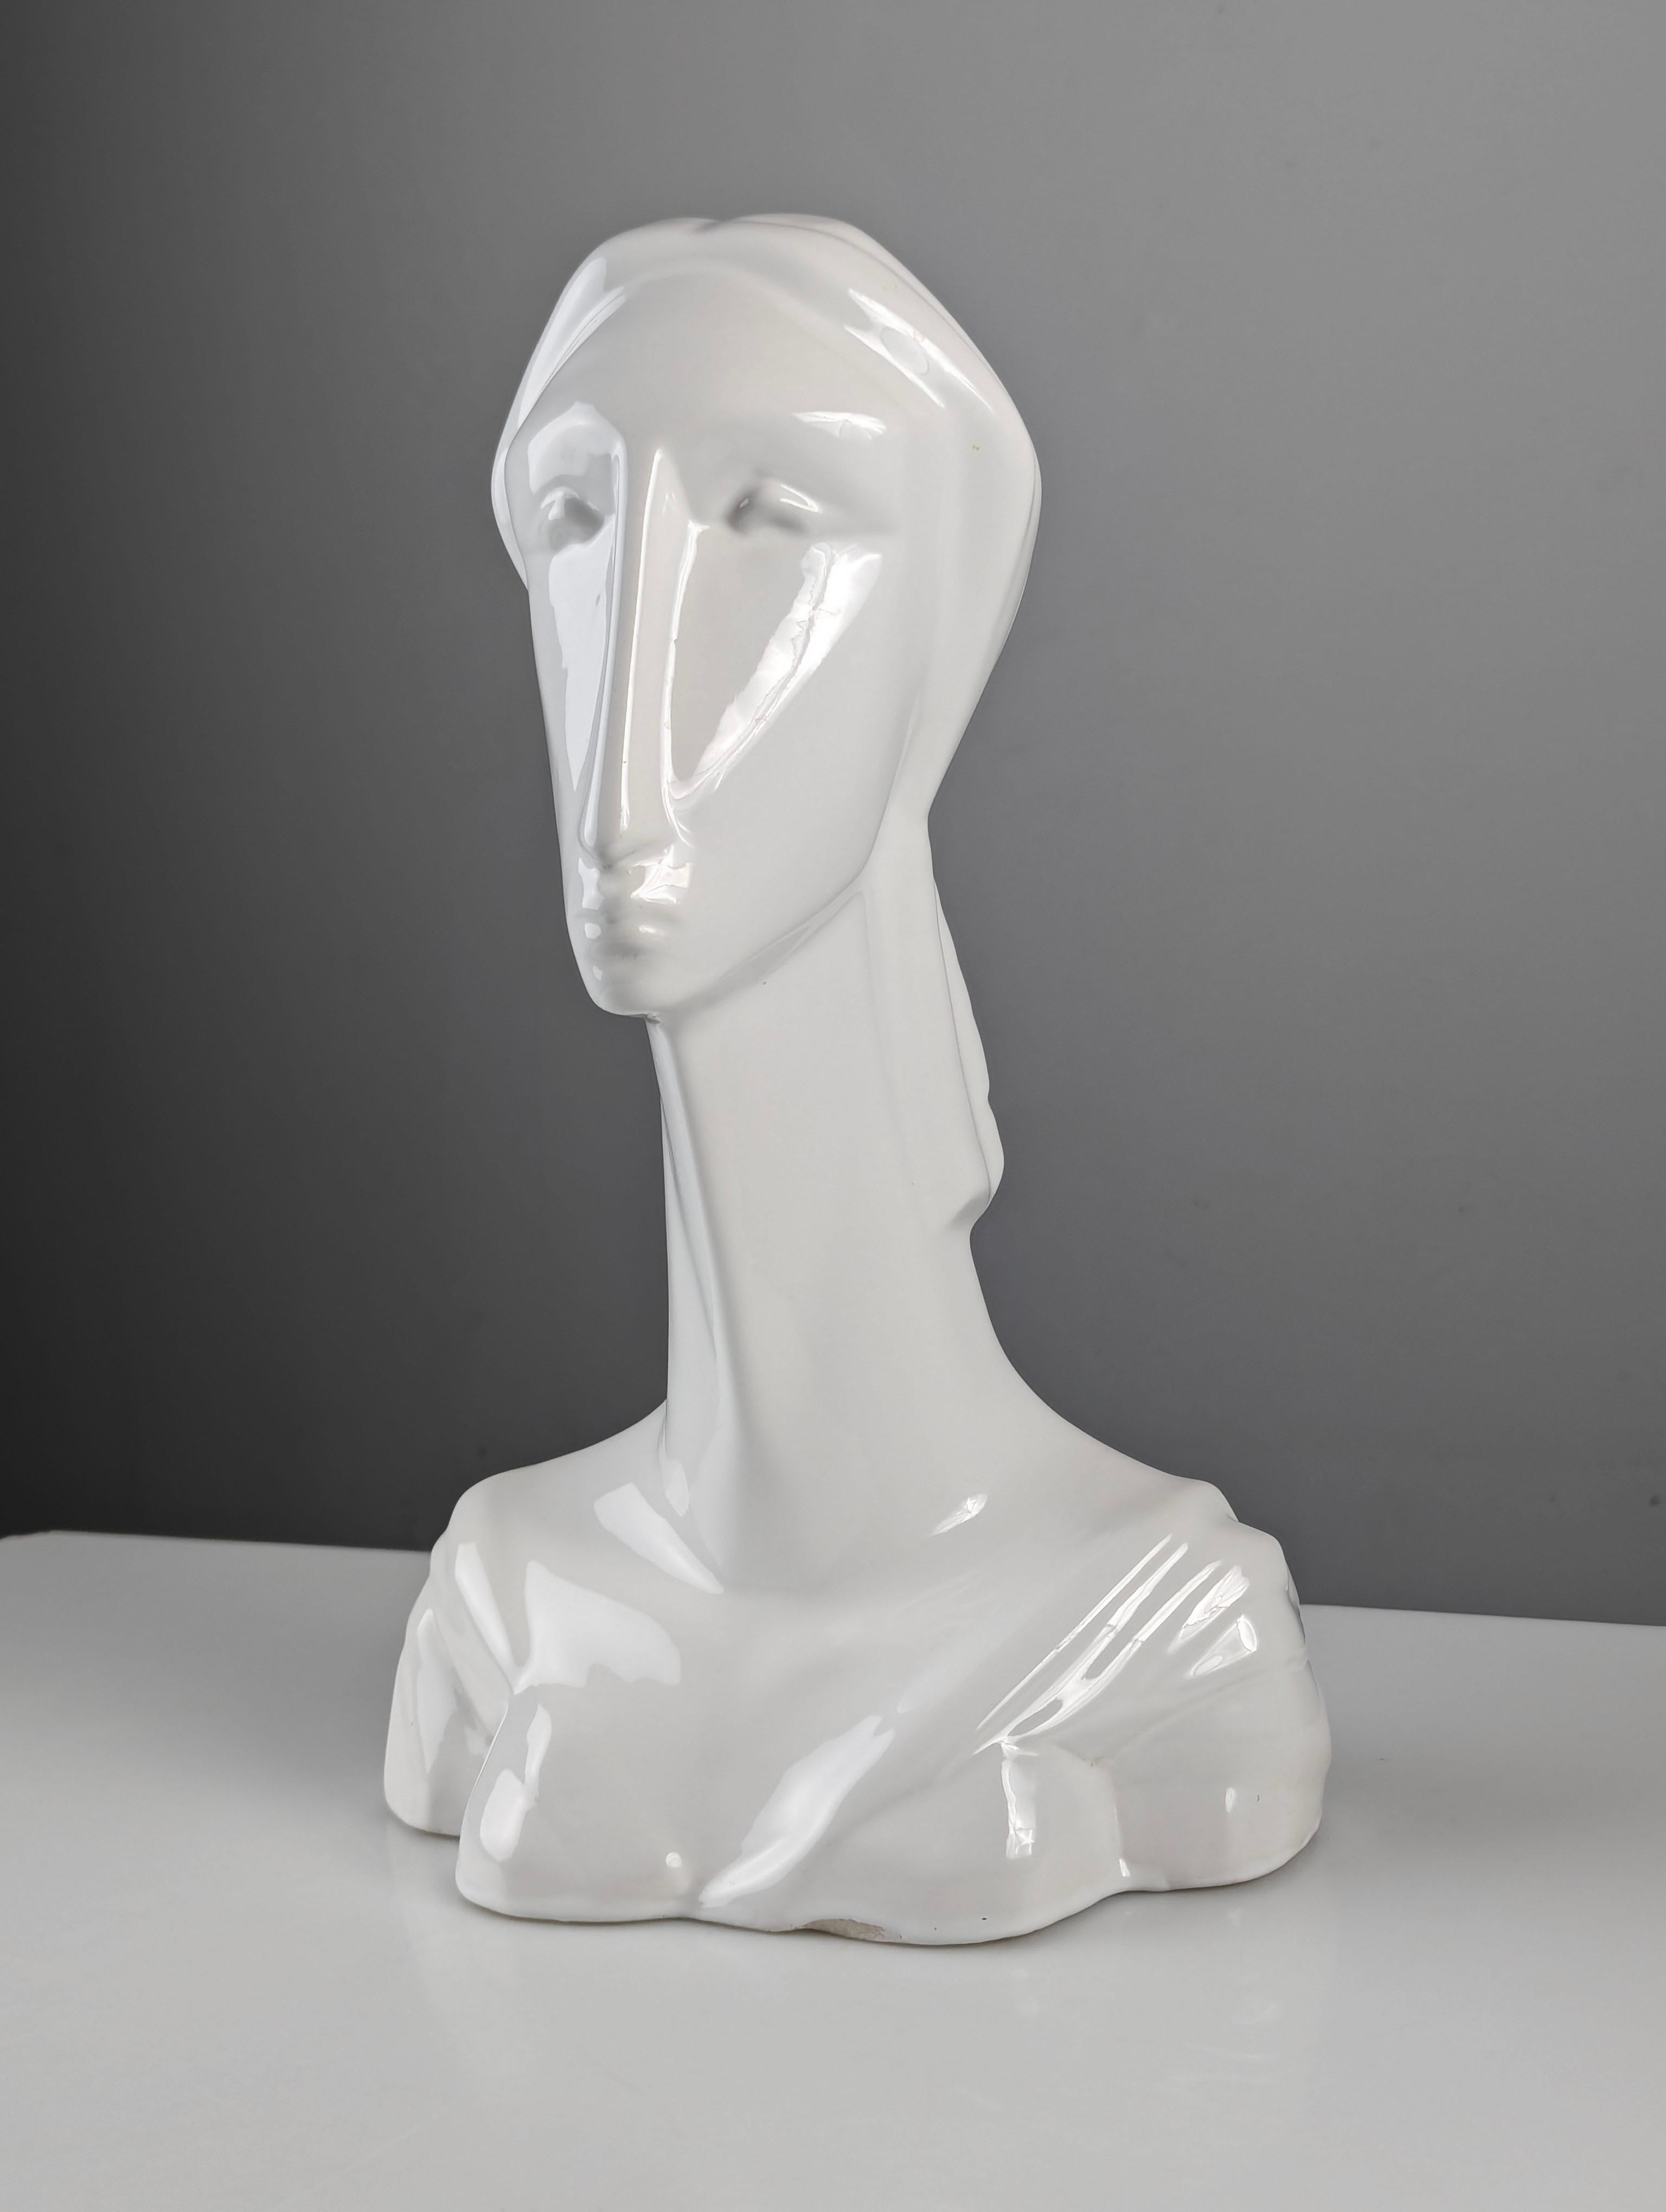 Ceramic sculpture of a female bust with elegant, straight, and elongated features, making it a very interesting and beautiful piece.